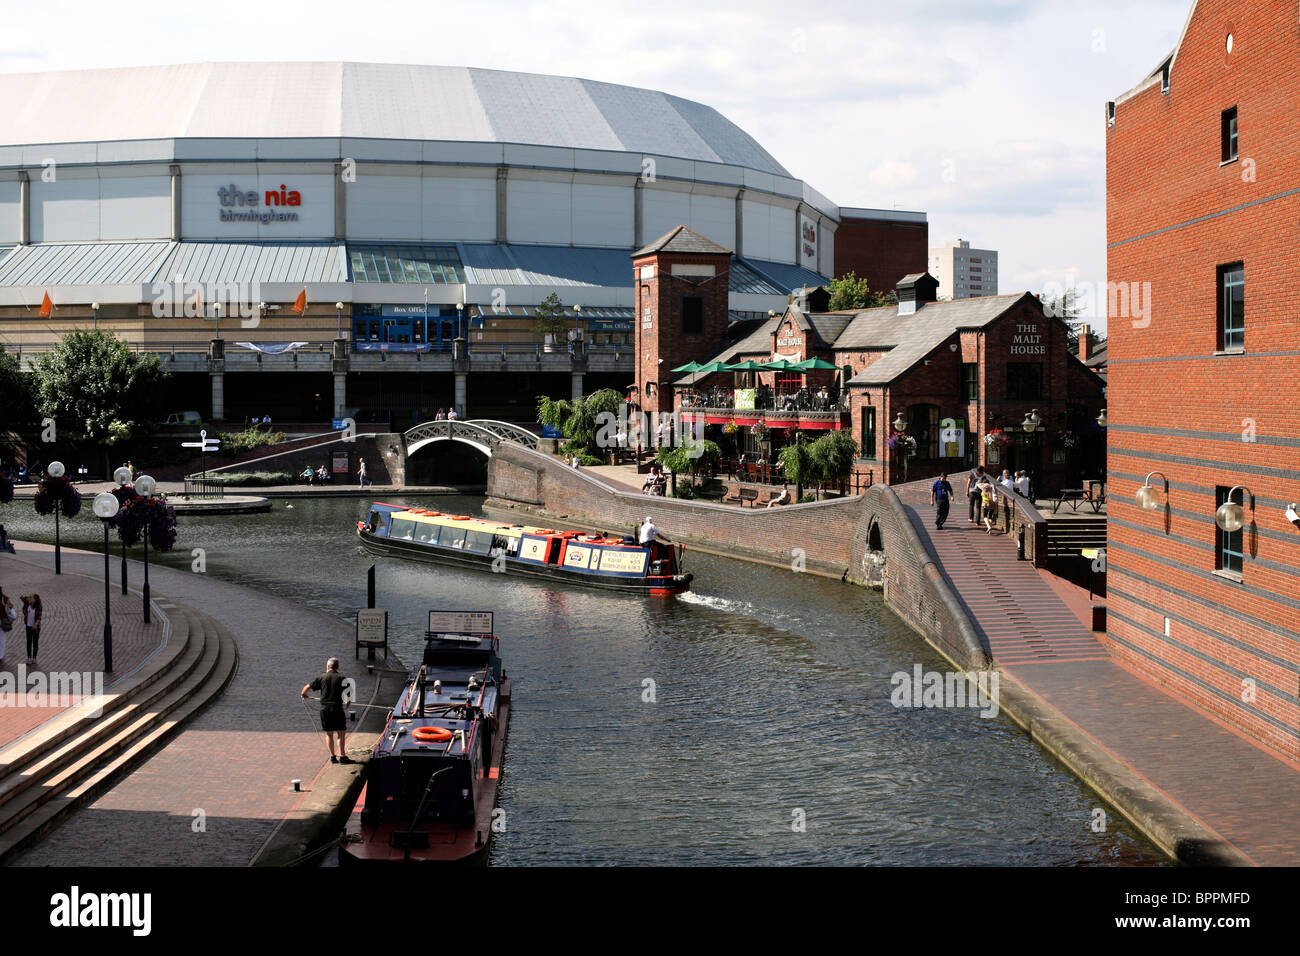 Part of the Birmingham canal network and the National Indoor Arena (NIA), Birmingham. Stock Photo